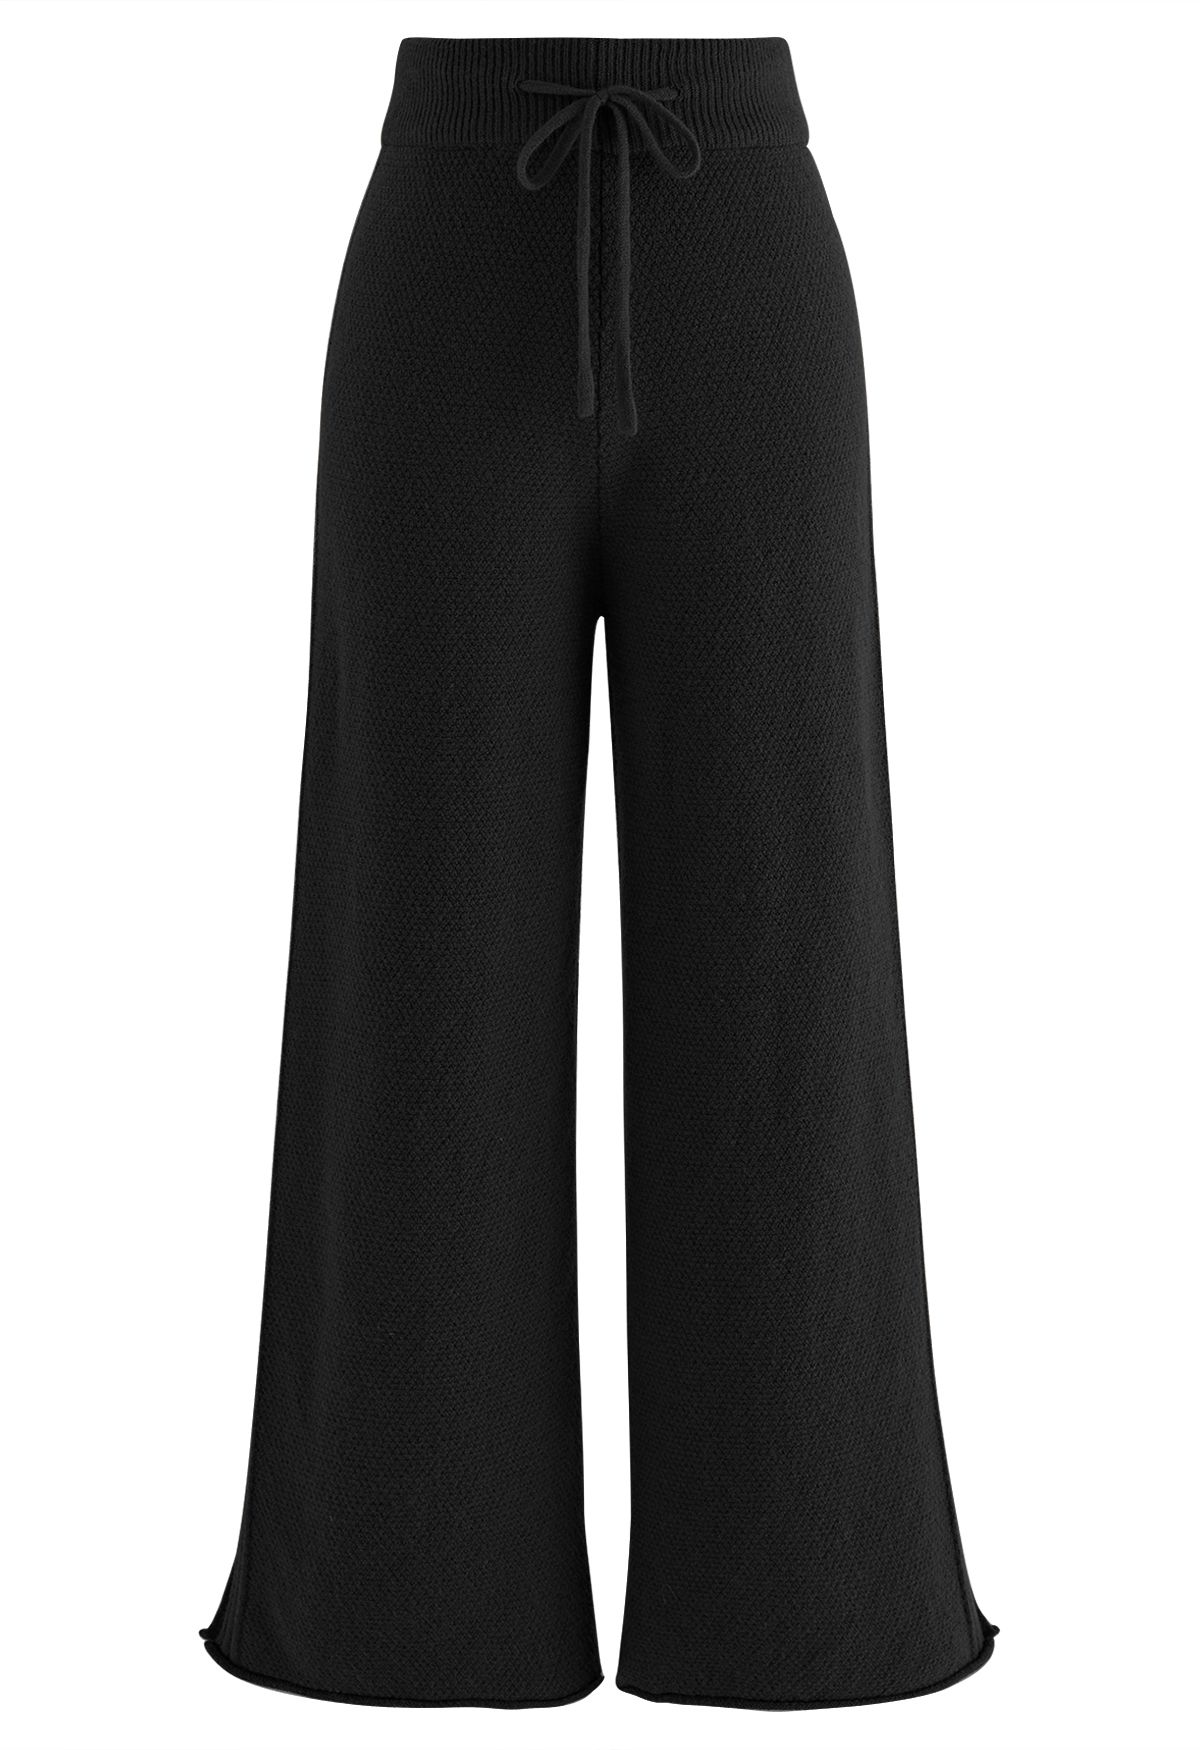 Women's Gilly Hicks Sweater-Knit Flare Pants